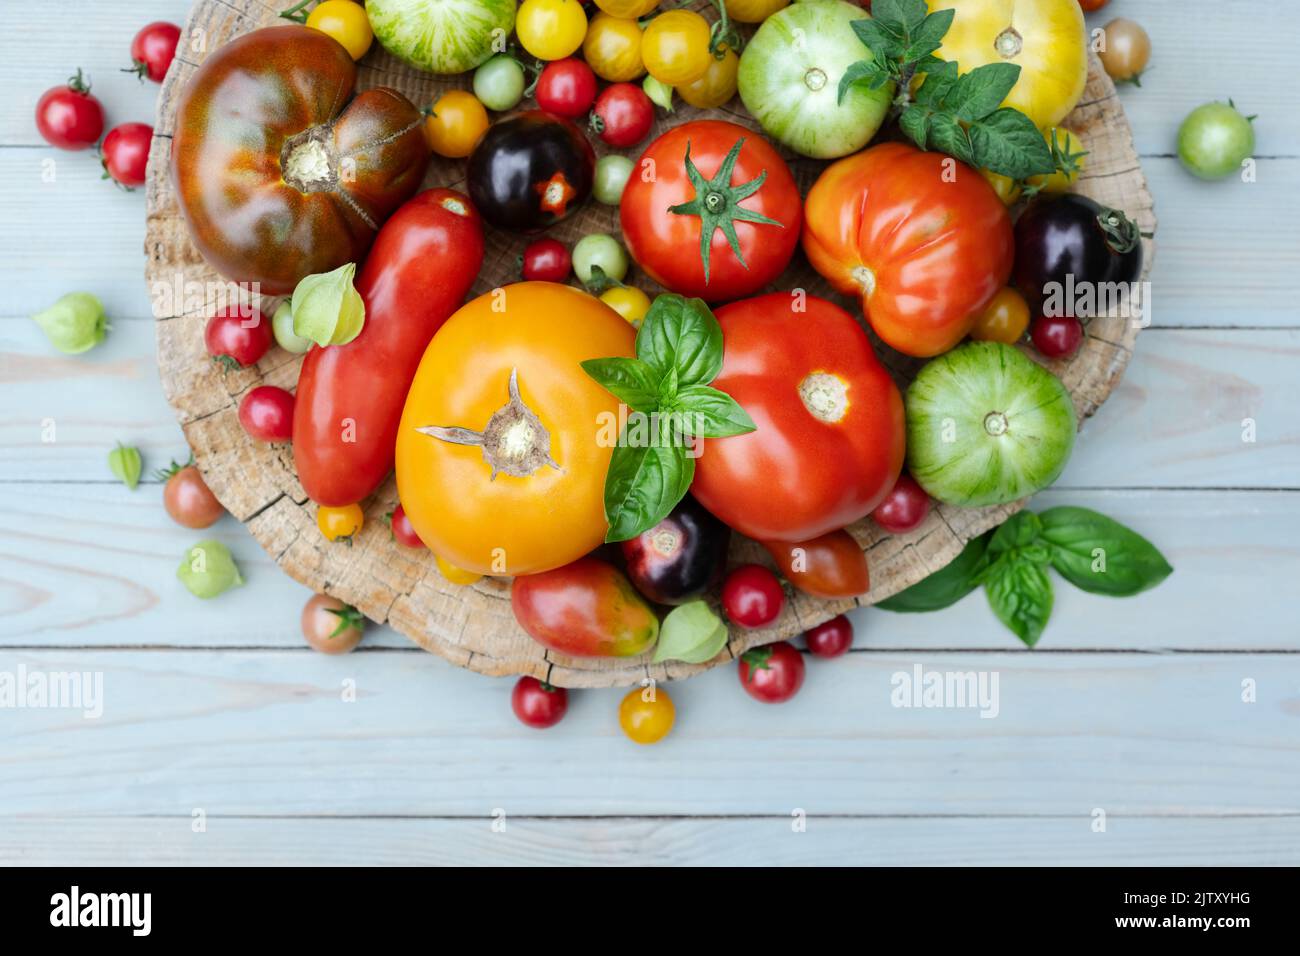 Different varieties kind of red, yellow, green and black tomato mix on wooden table. Fresh assorted colorful summer tomatoes background, close up. Food photography Stock Photo